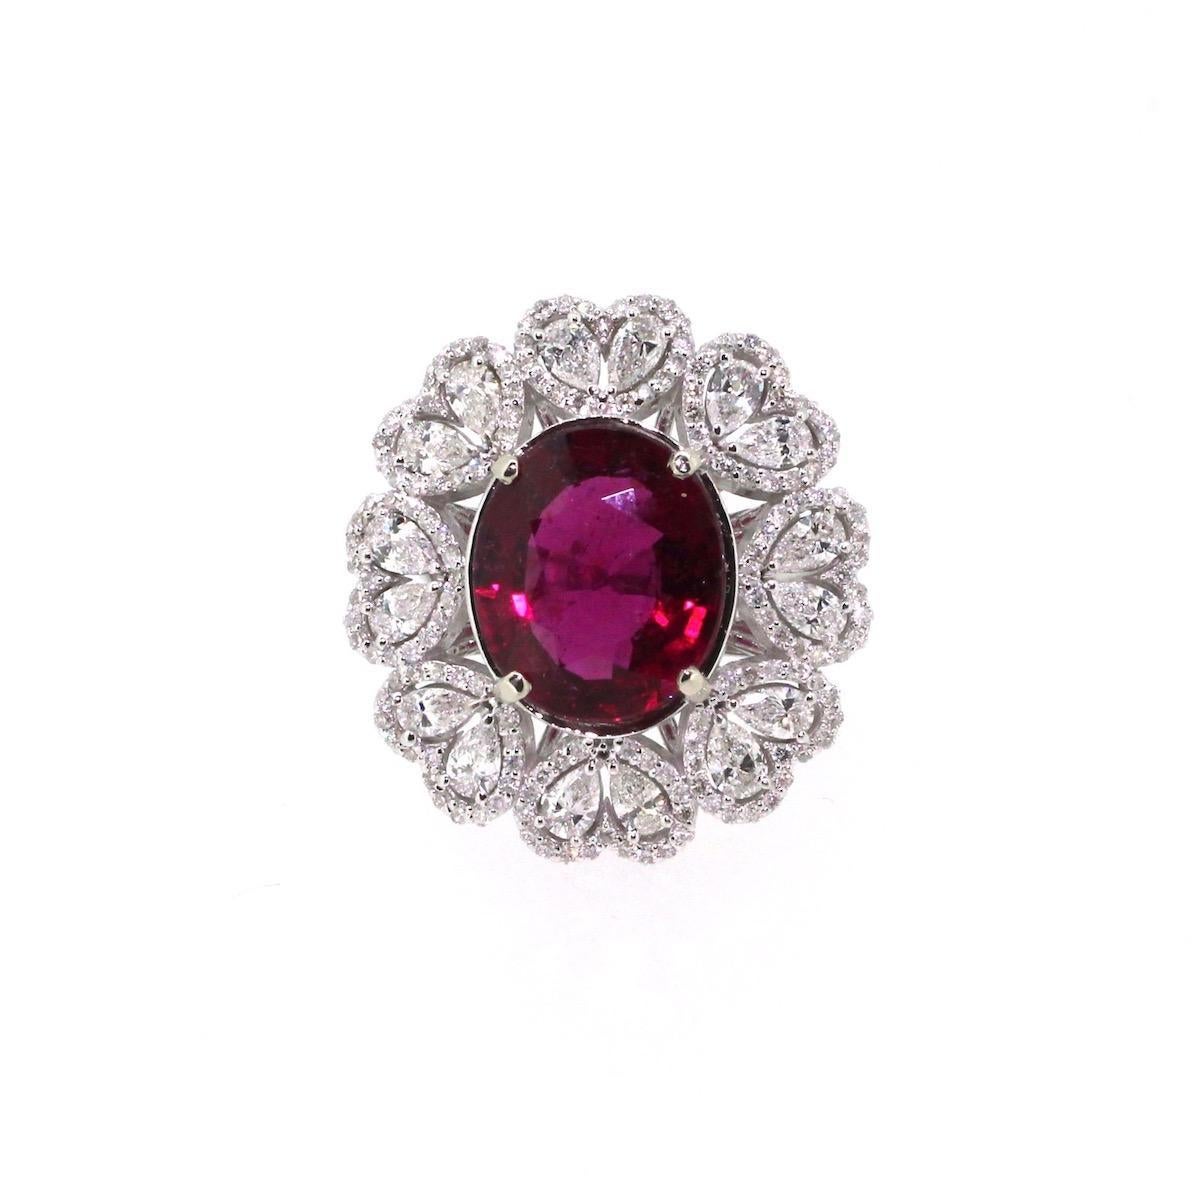 5.17 Carat Rubellite Tourmaline and Diamonds Cluster Heart Ring, 18 Karat Gold In Good Condition For Sale In London, GB